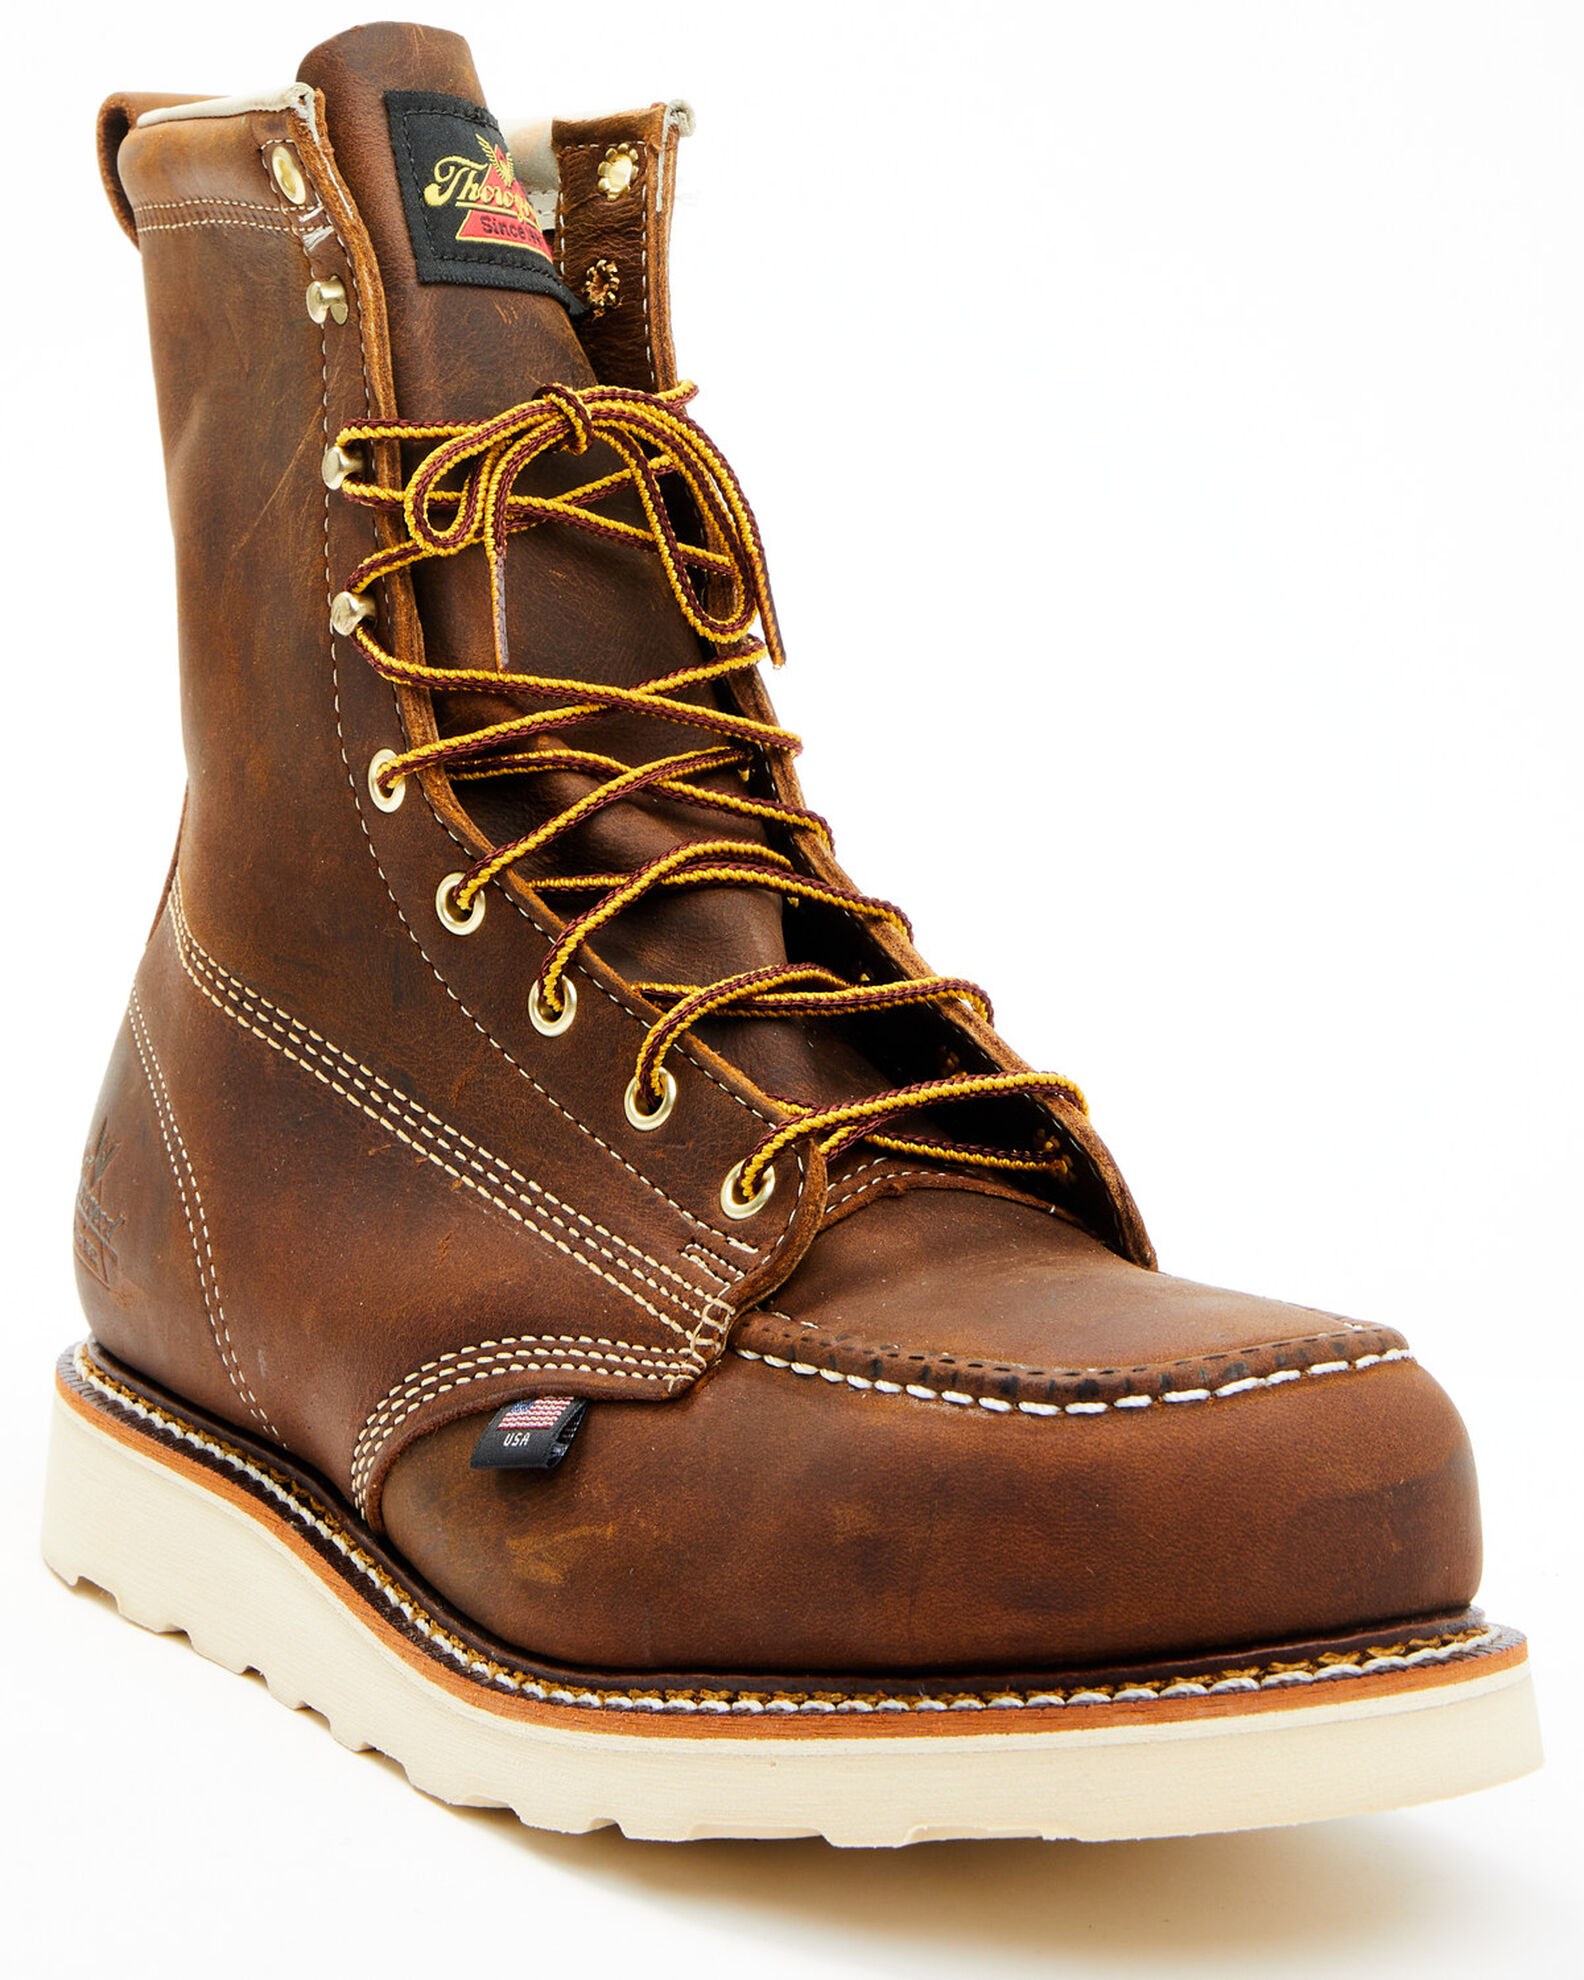 Thorogood Men's American Heritage 8" Made The USA Wedge Work Boots